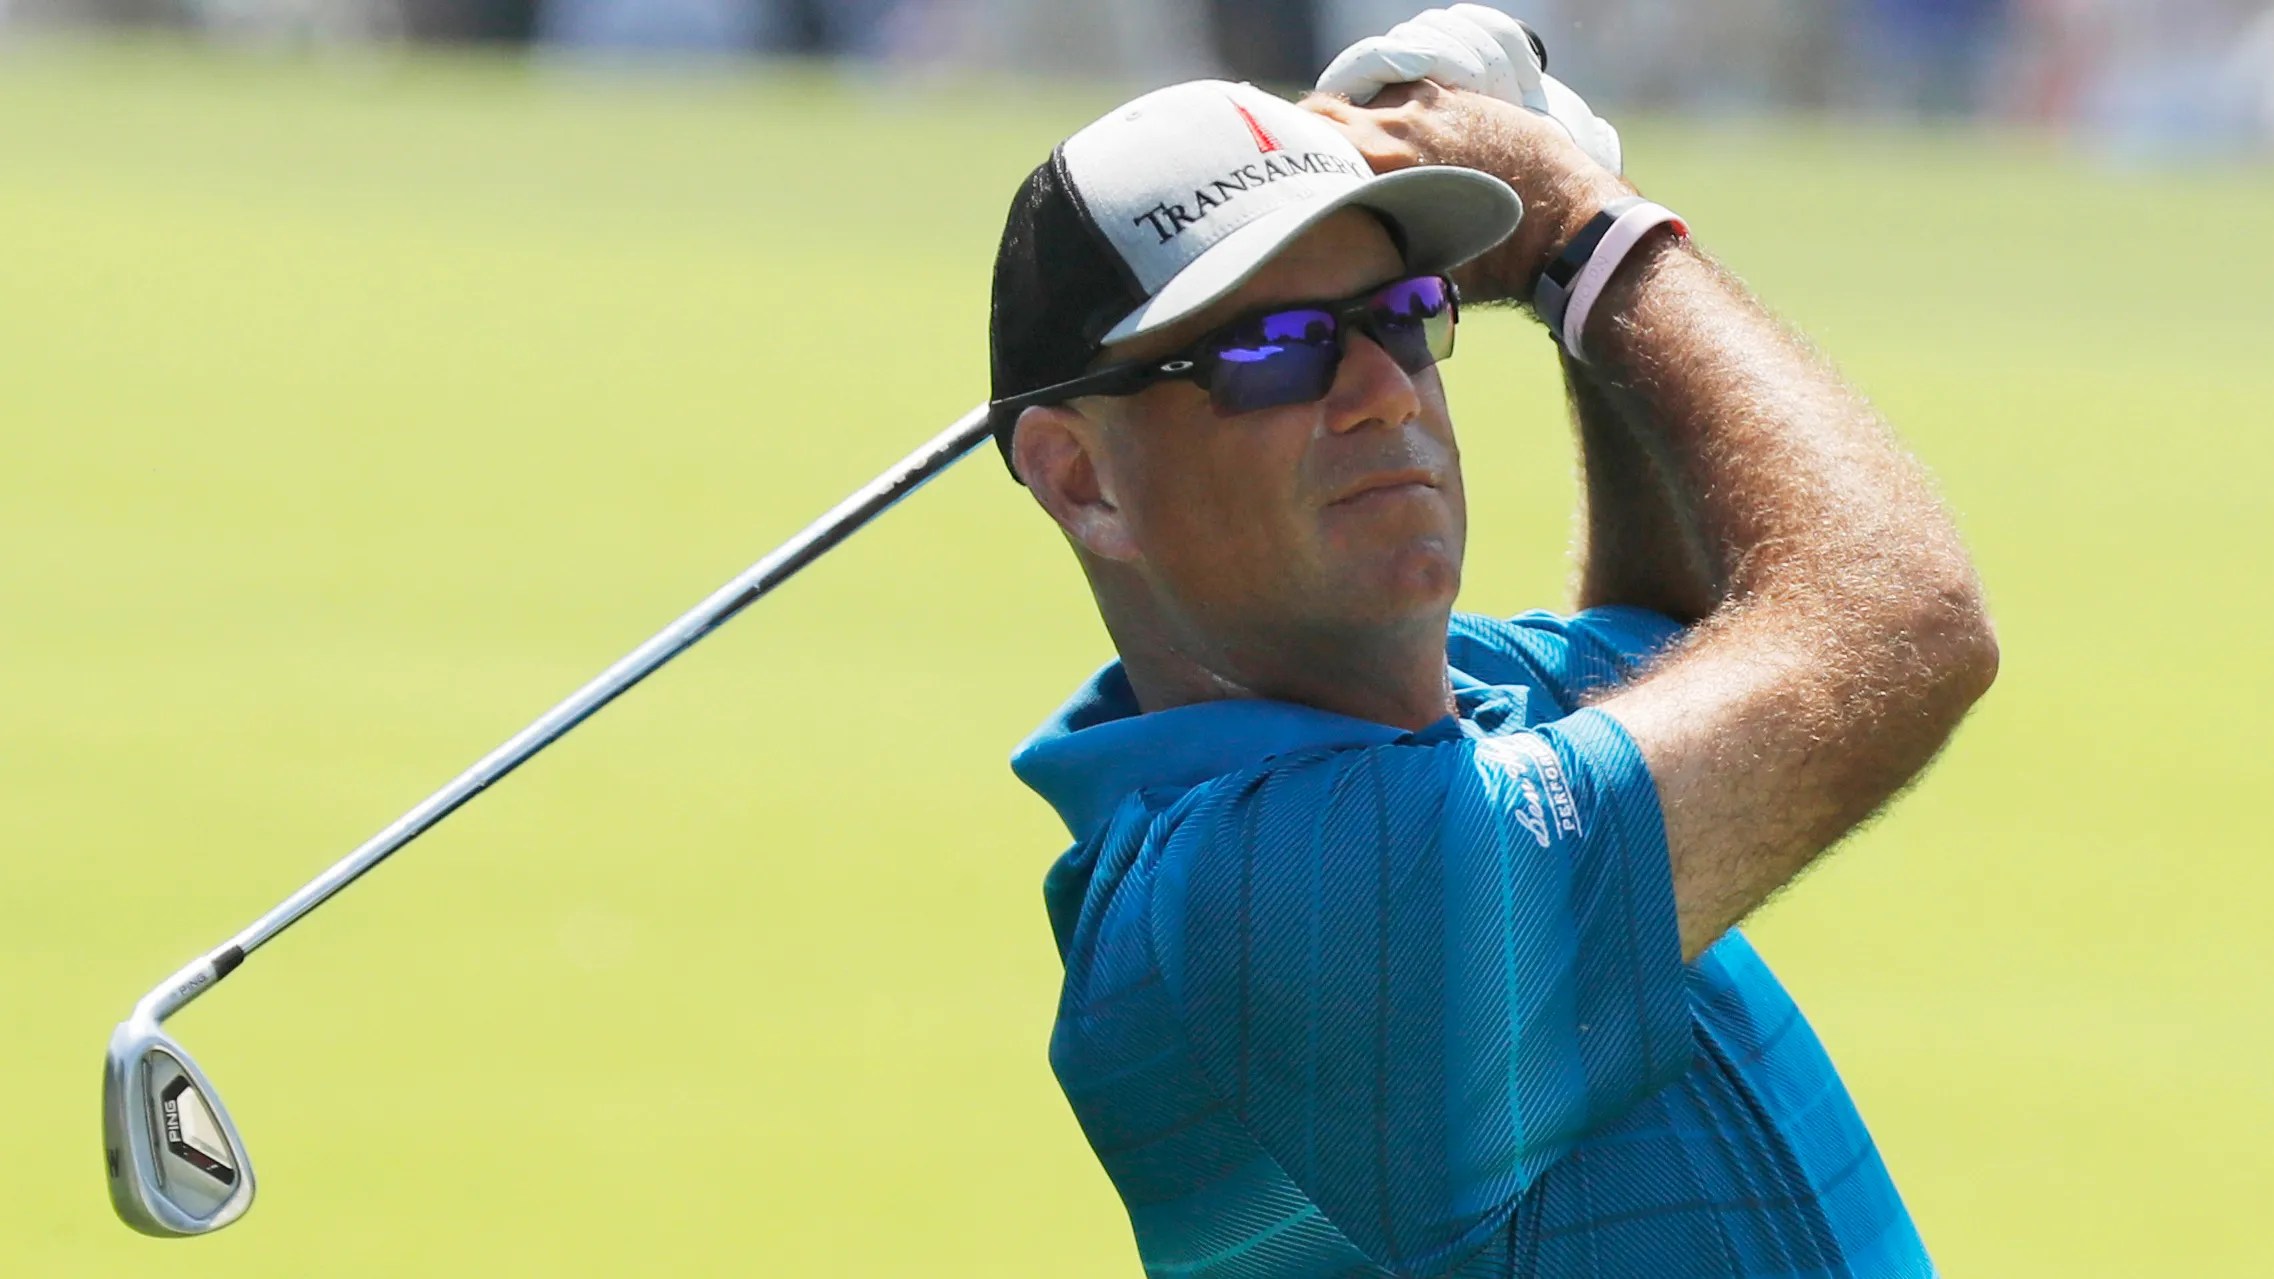 Stewart Cink's season takes a quick turn for the better